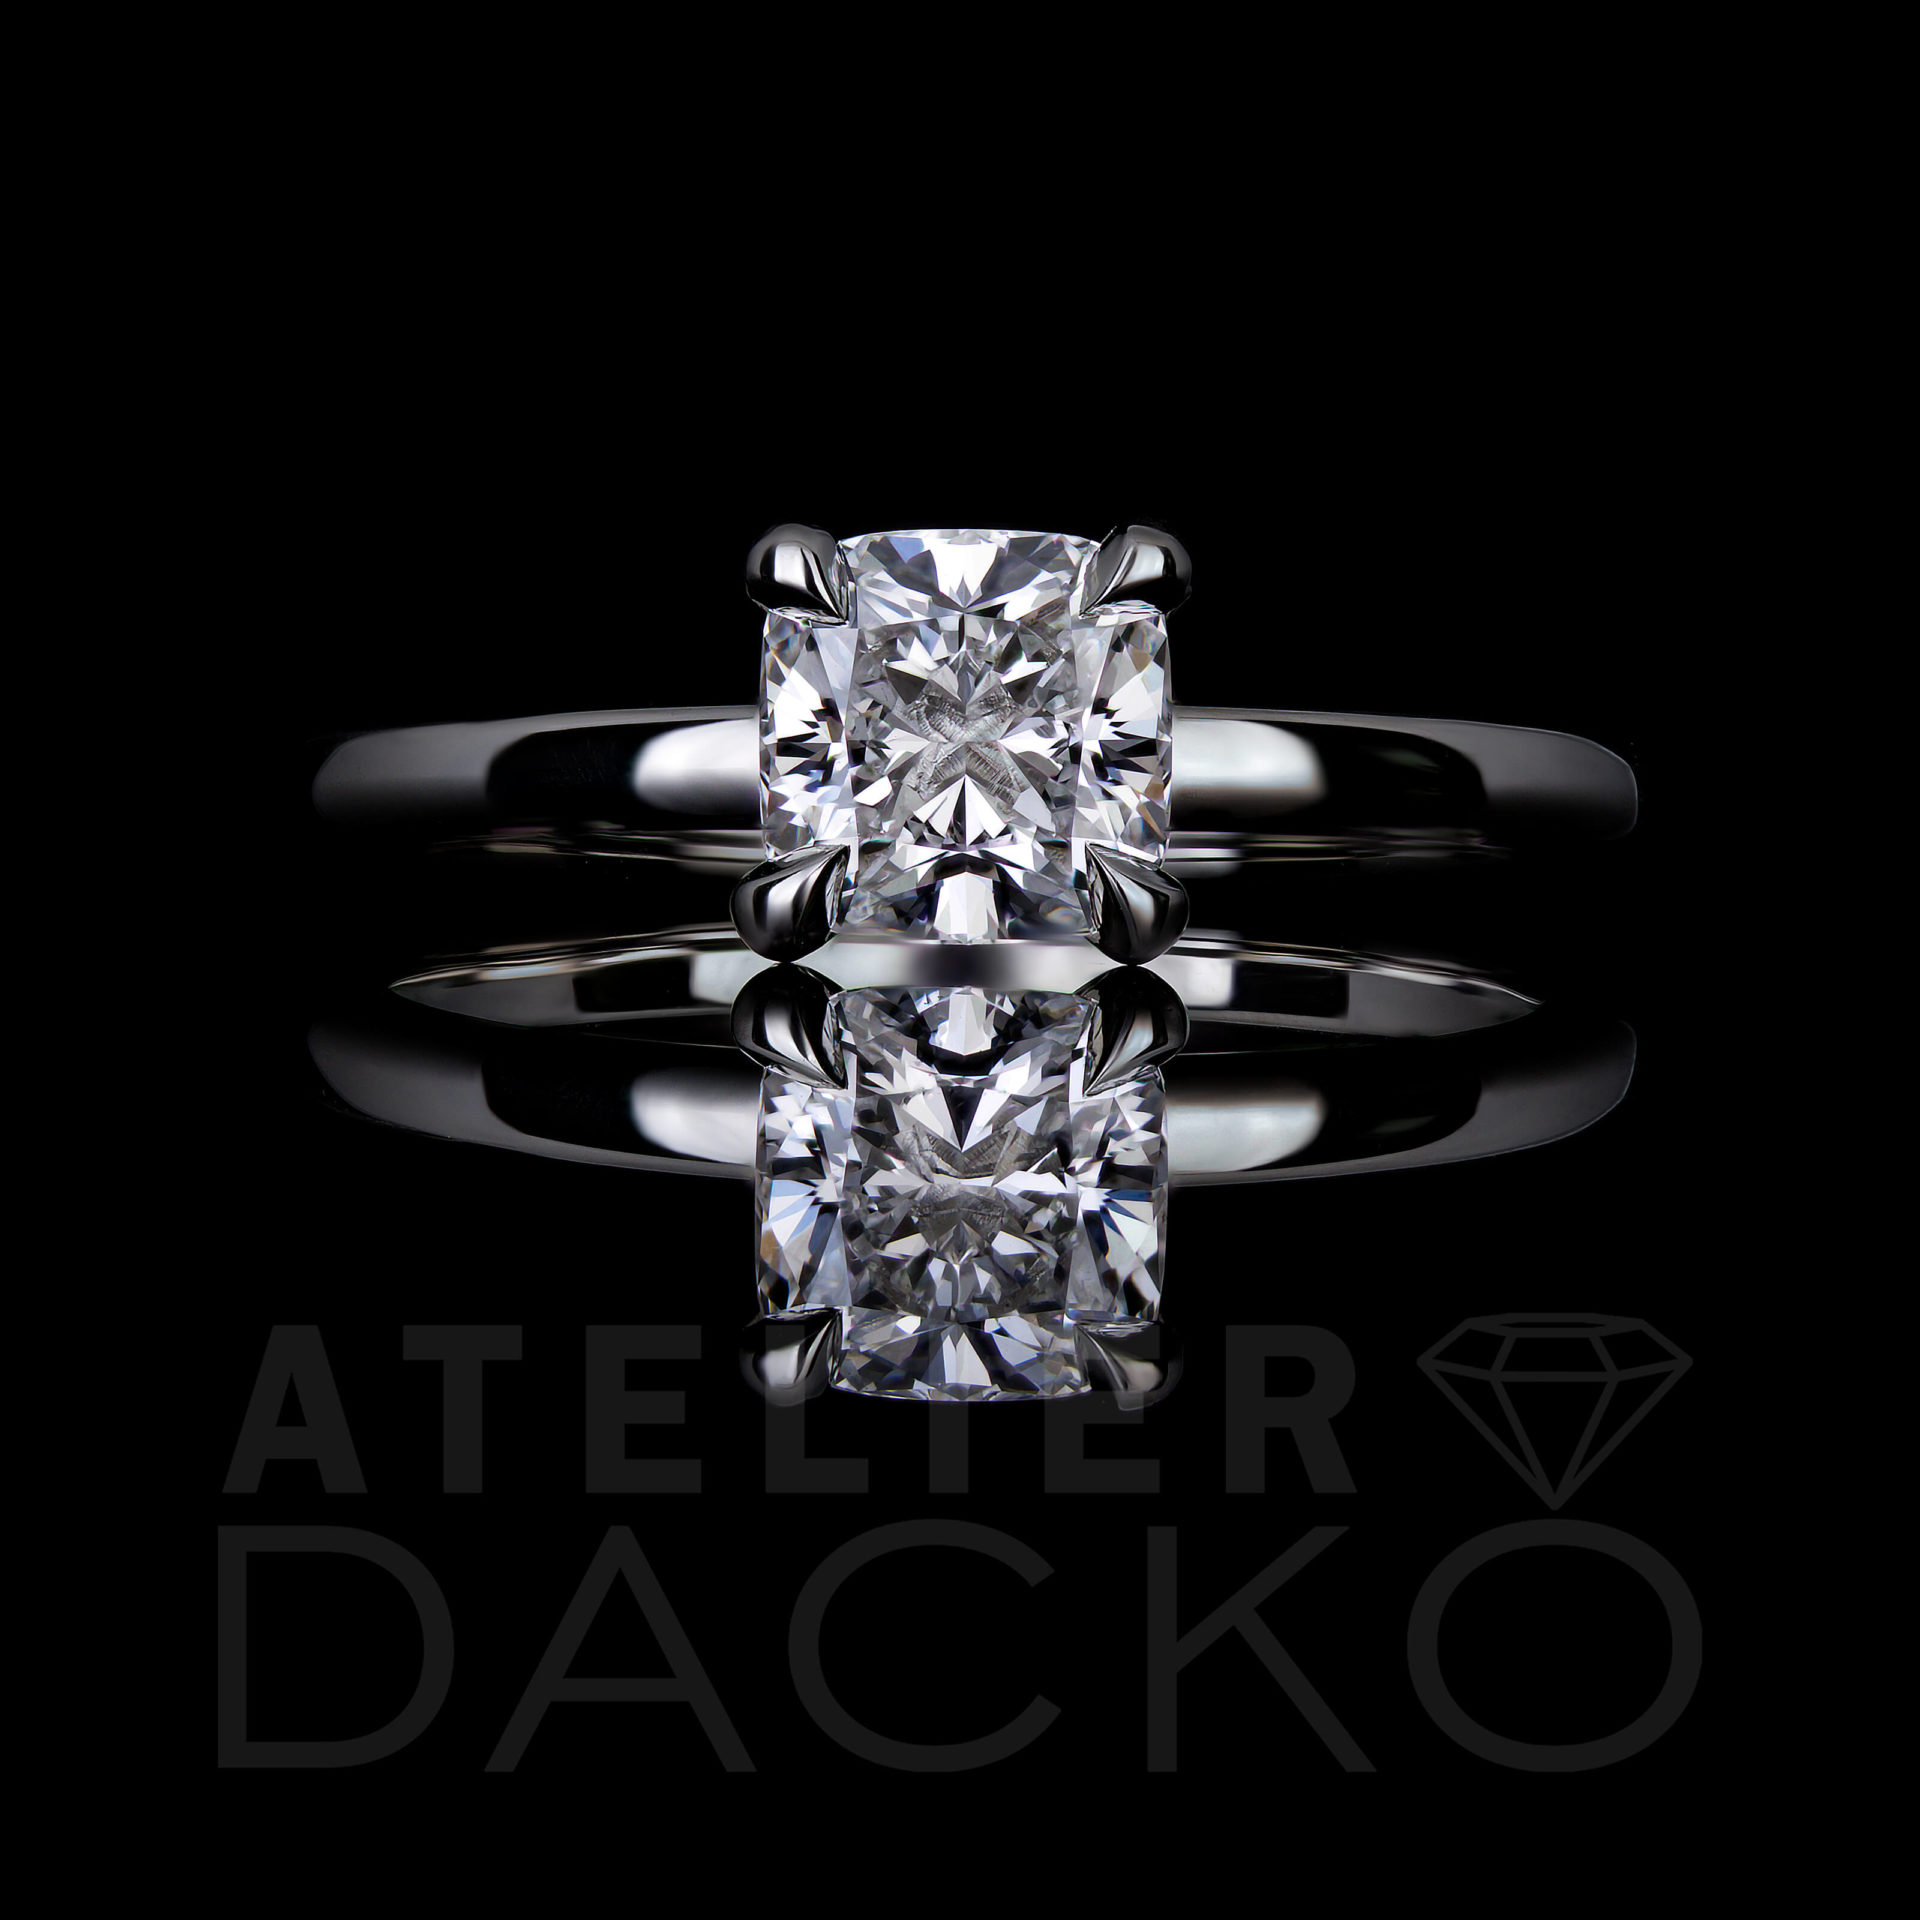 AD039 - 1.15 CT Solitaire Cushion Cut Diamond Engagement Ring - 1